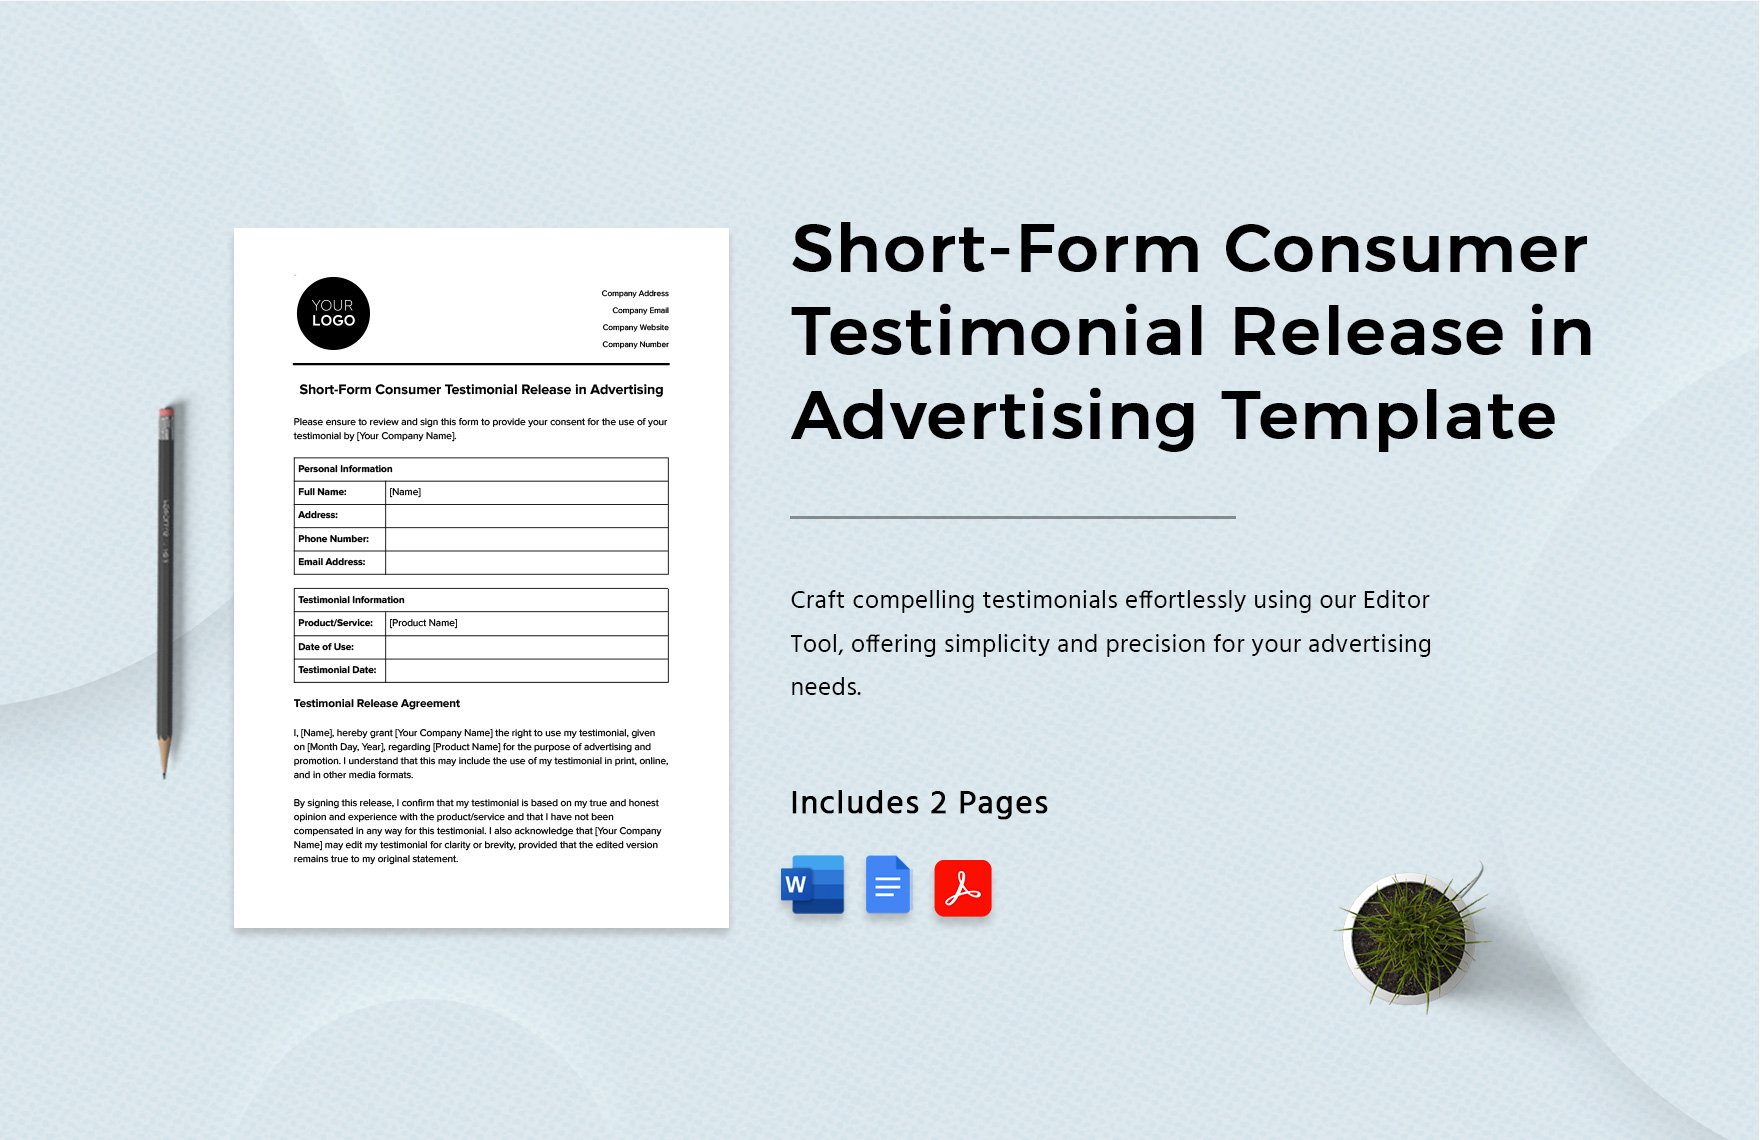 Short-Form Consumer Testimonial Release in Advertising Template